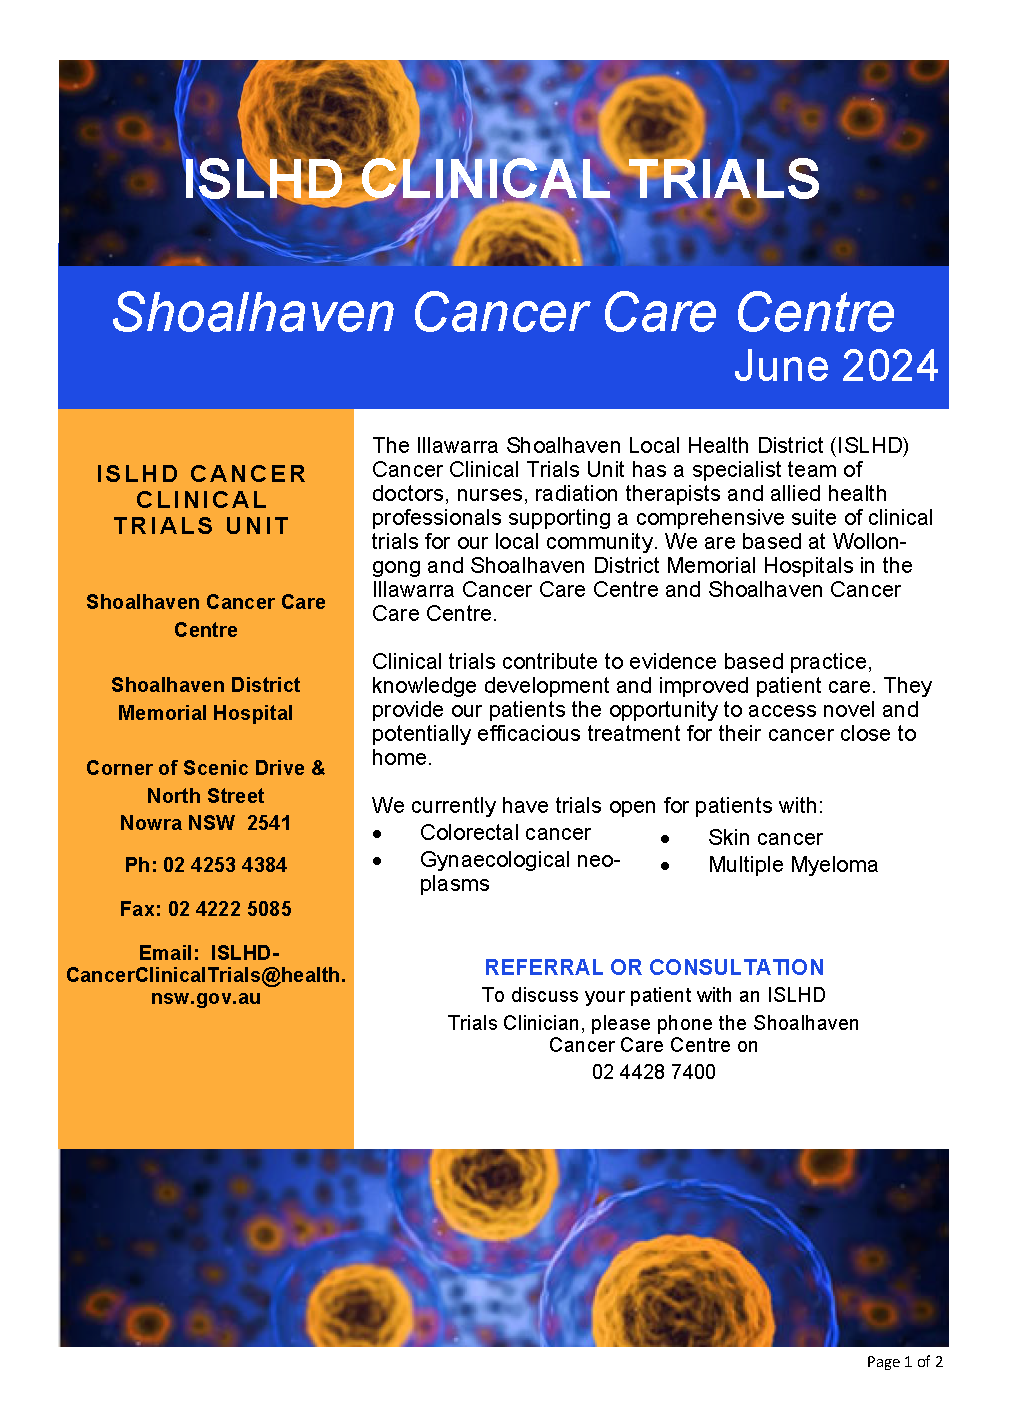 Cover of SCCC Oncology and Haematology newsletter